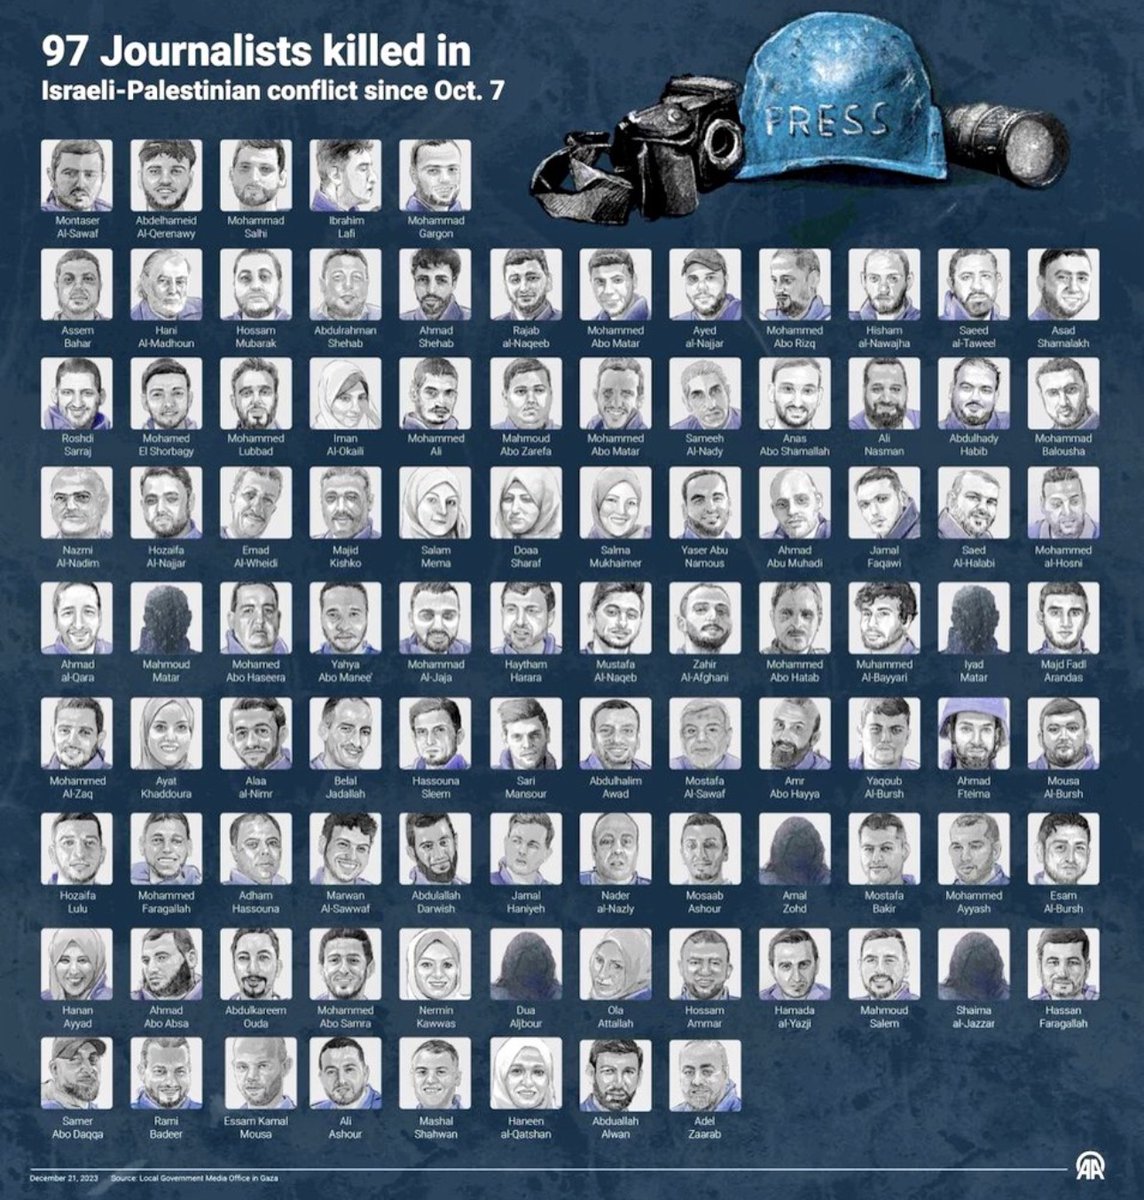 ISRAEL HAS NOW KILLED 97 JOURNALISTS WAR CRIMES